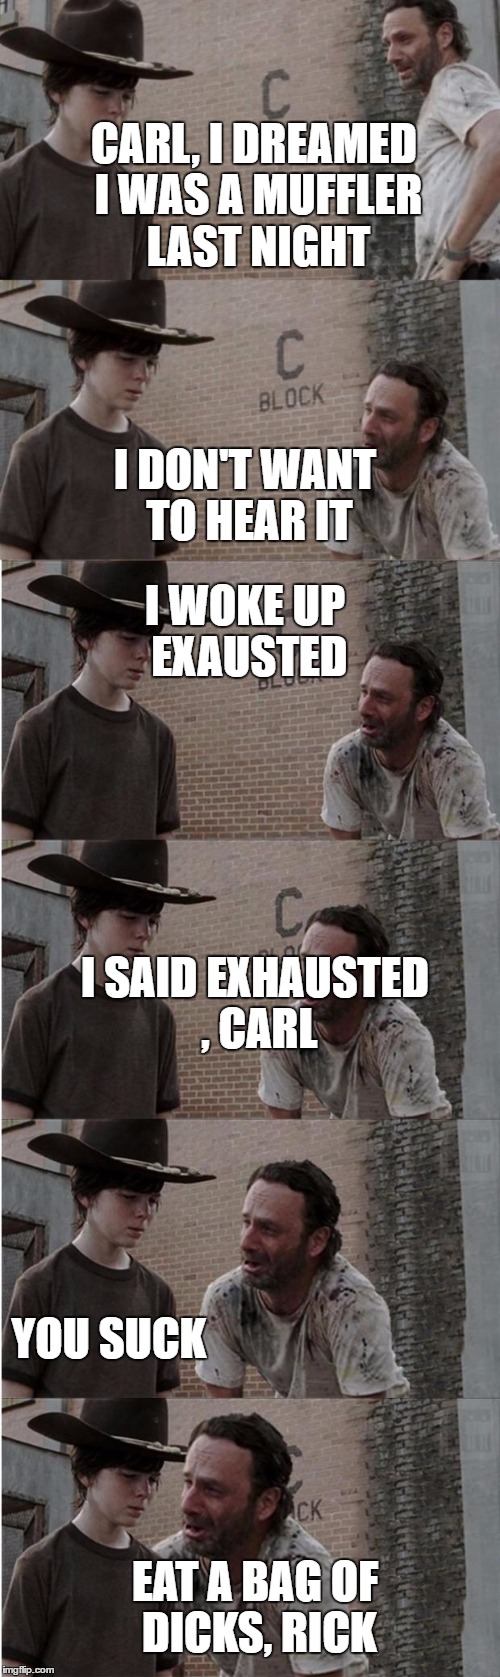 Rick and Carl Longer Meme | CARL, I DREAMED I WAS A MUFFLER LAST NIGHT; I DON'T WANT TO HEAR IT; I WOKE UP EXAUSTED; I SAID EXHAUSTED , CARL; YOU SUCK; EAT A BAG OF DICKS, RICK | image tagged in memes,rick and carl longer | made w/ Imgflip meme maker